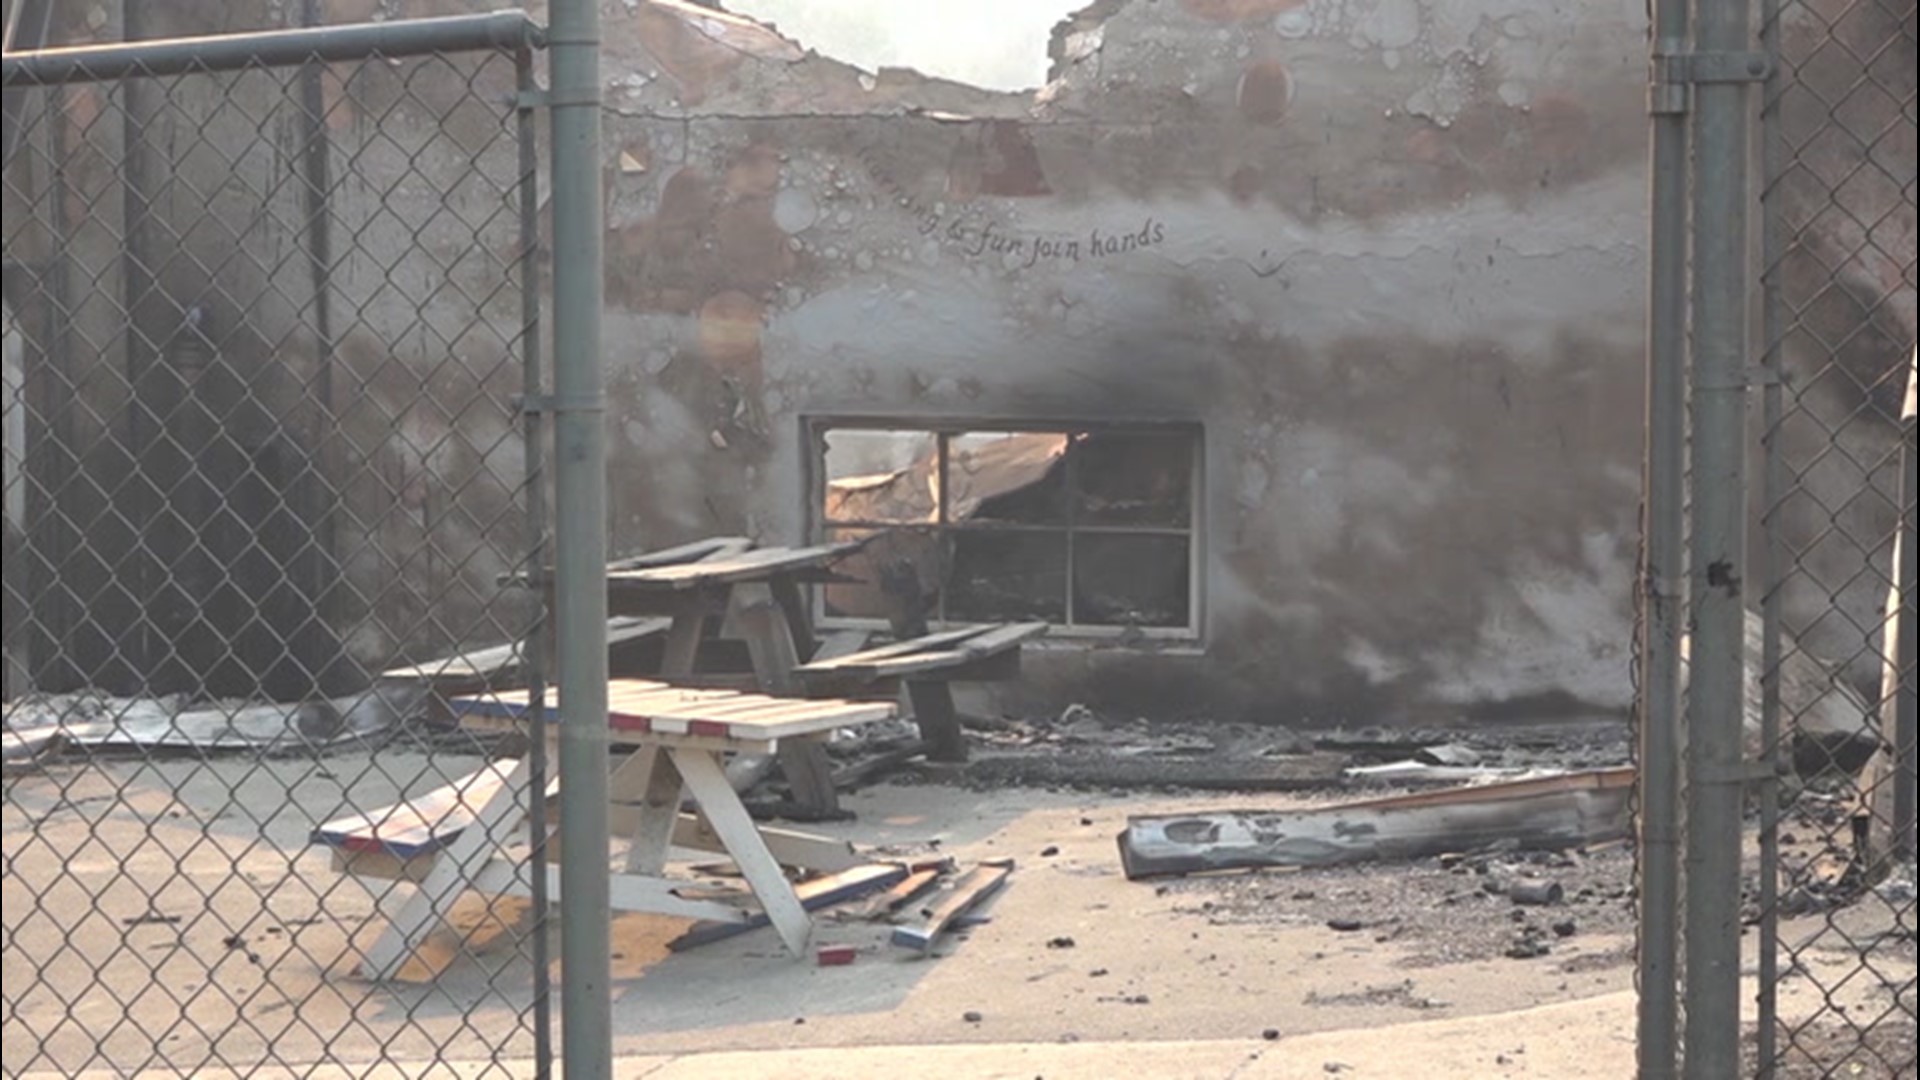 Educators in Deer Park, California, say lessons are on hold after the Glass Fire destroyed an elementary school building a houses throughout the neighborhood.